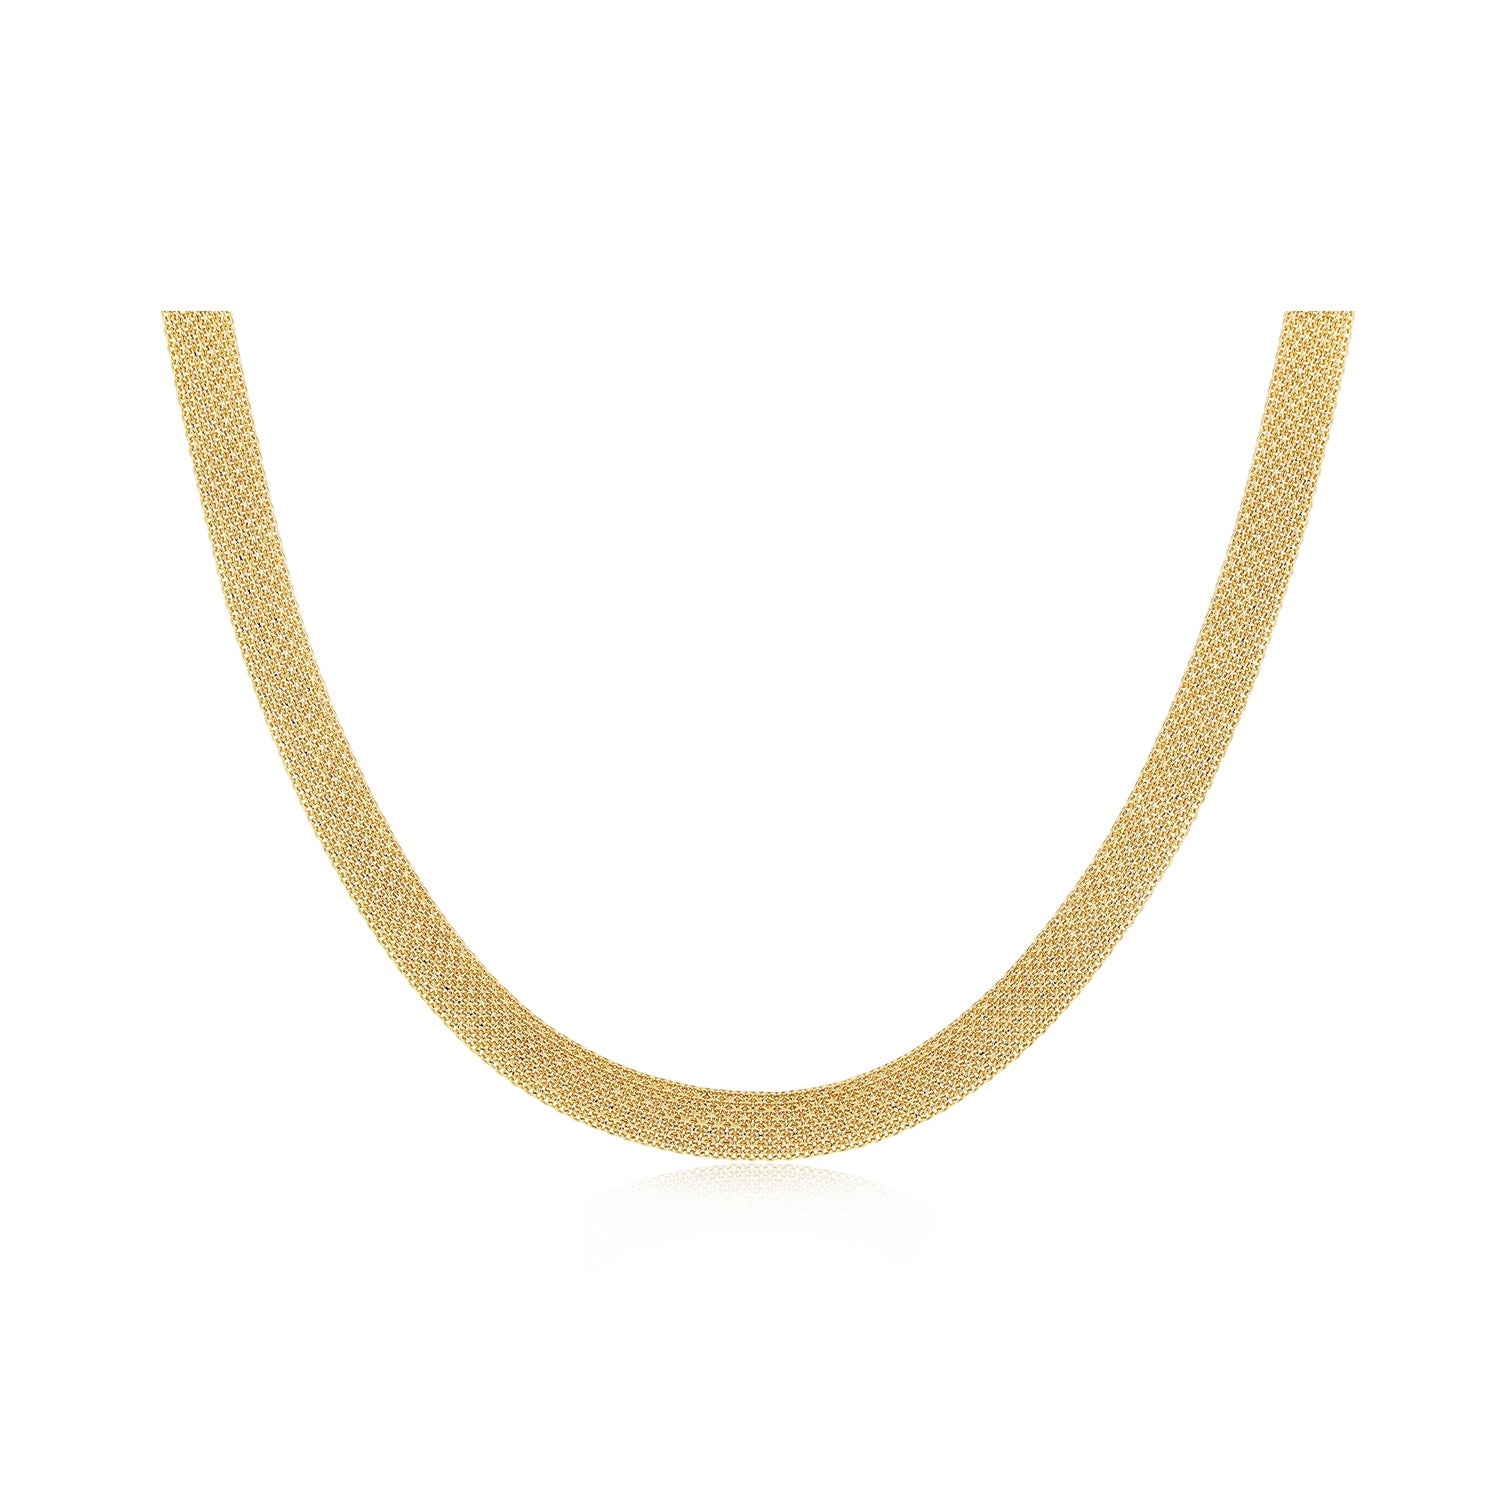 Gold Mesh Necklace in 14k yellow gold